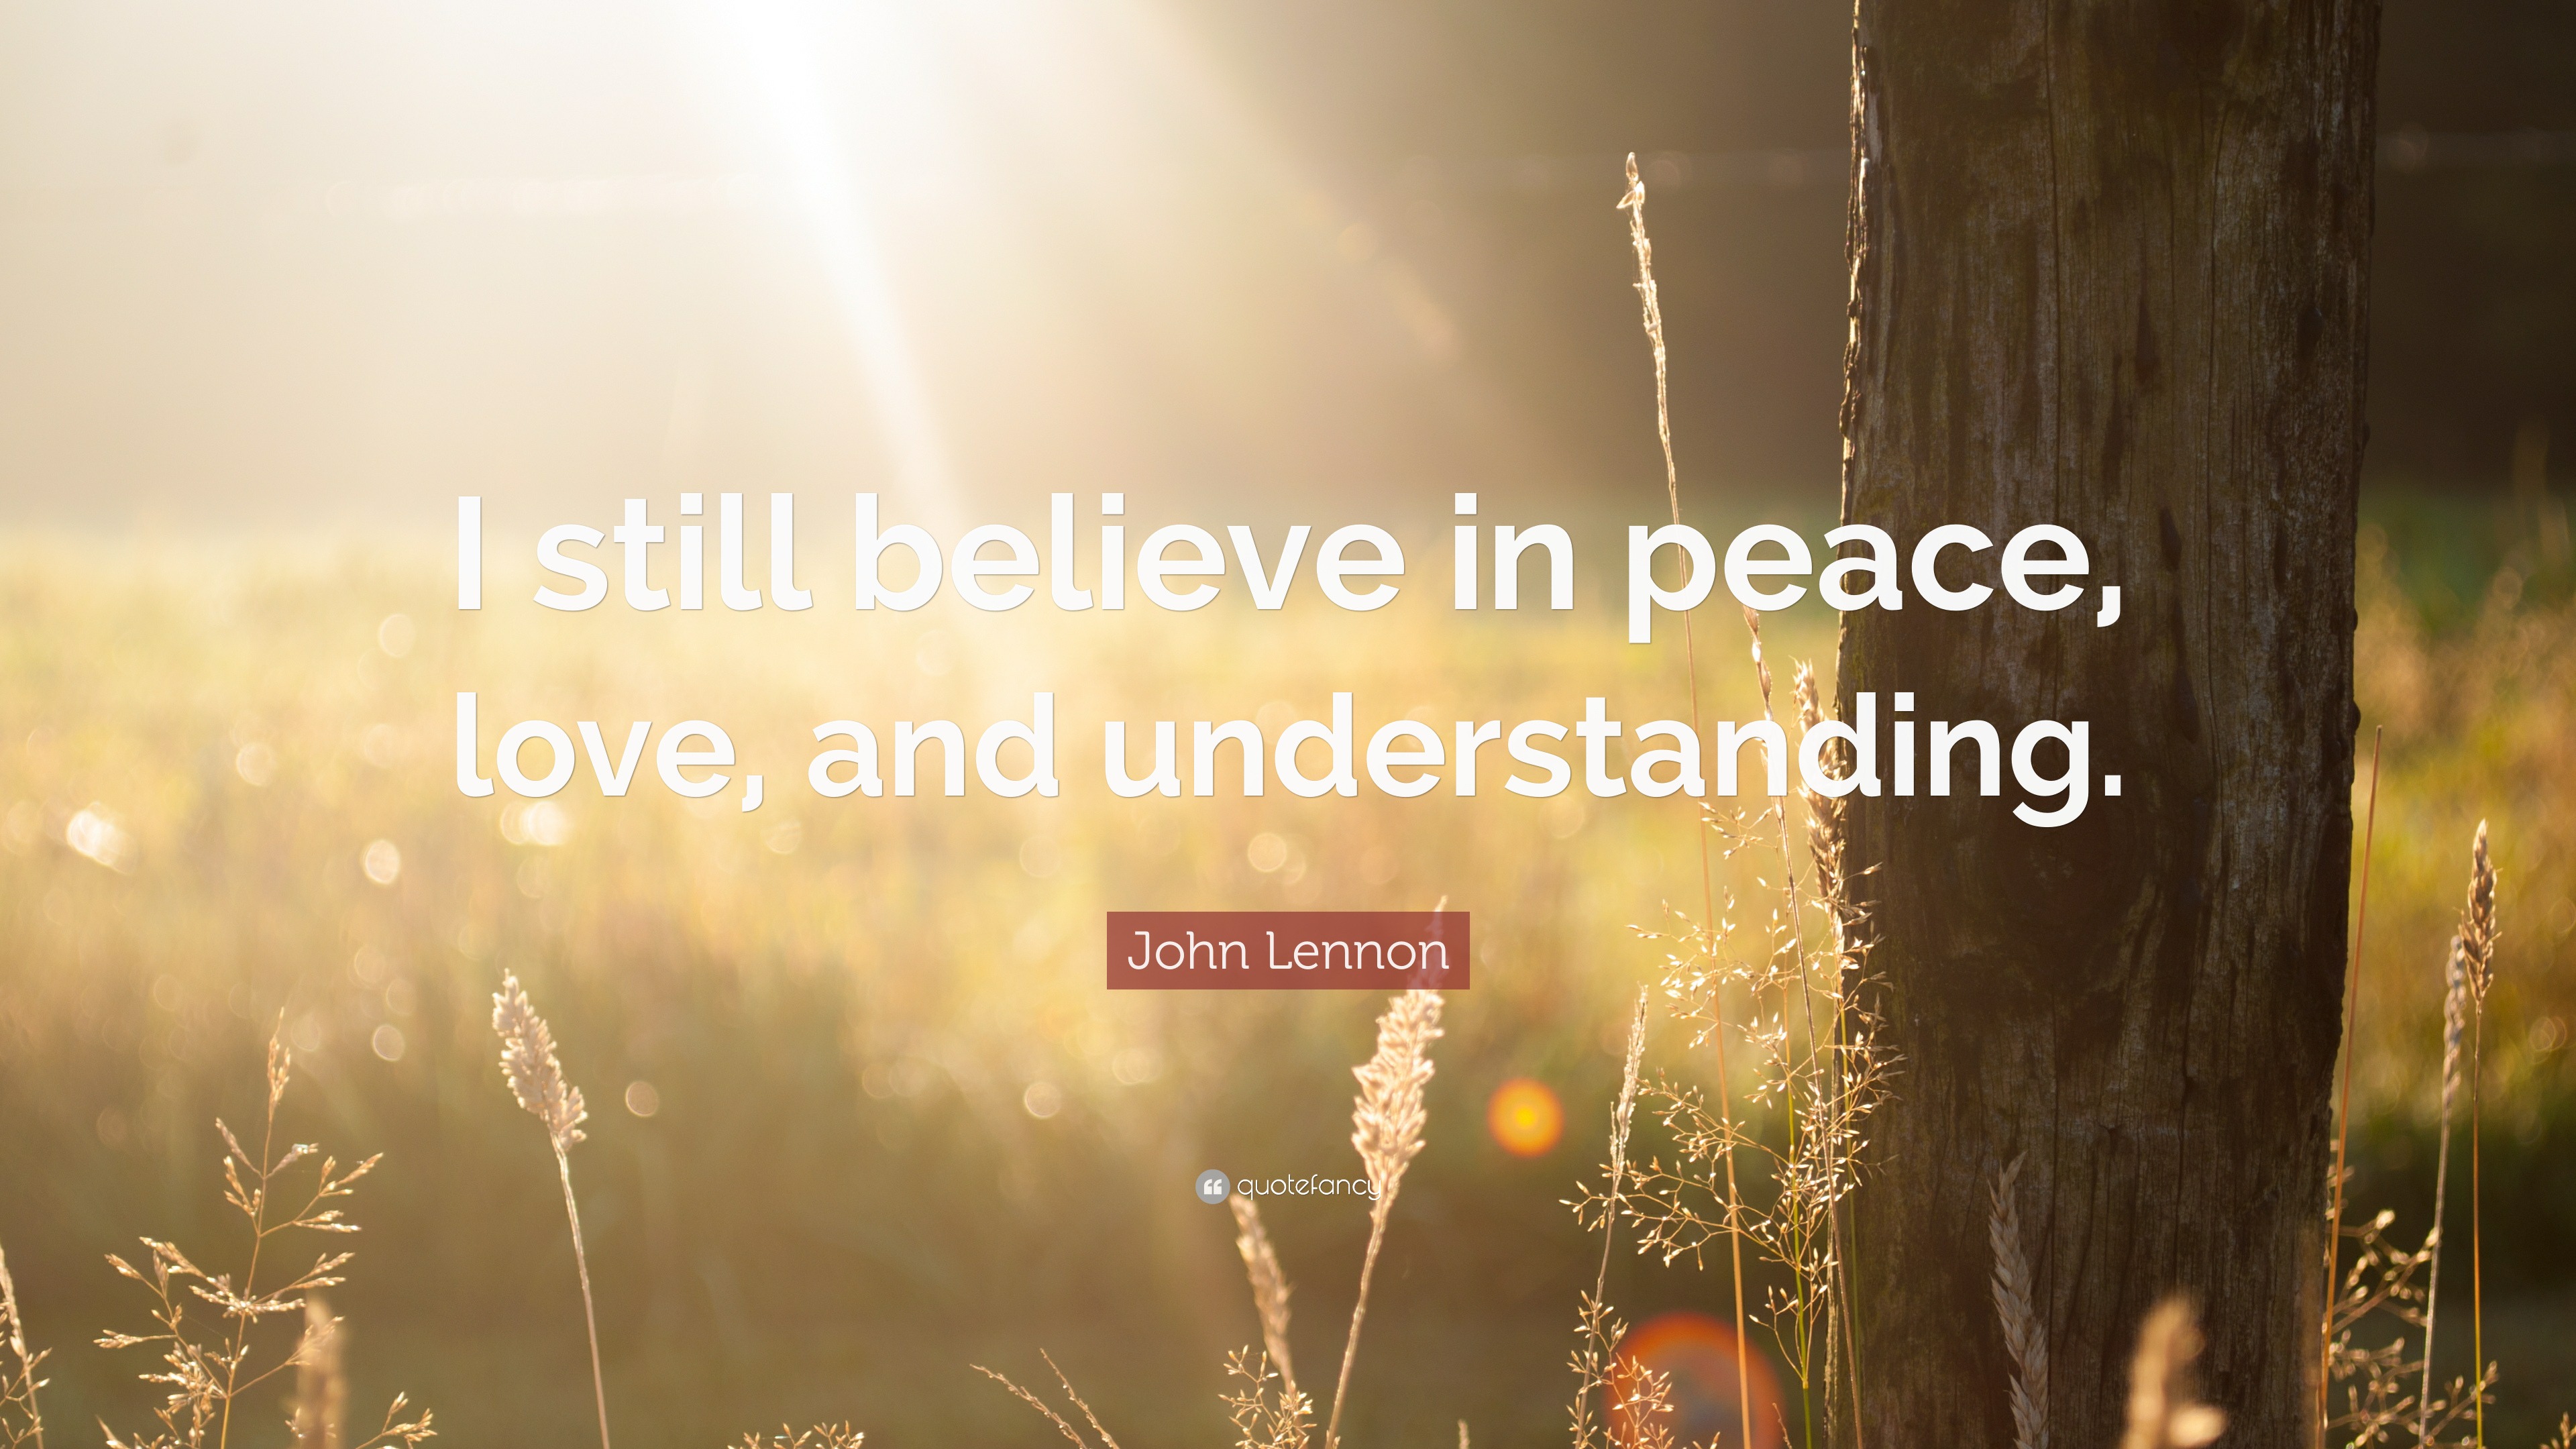 John Lennon Quote: “I still believe in peace, love, and understanding.”